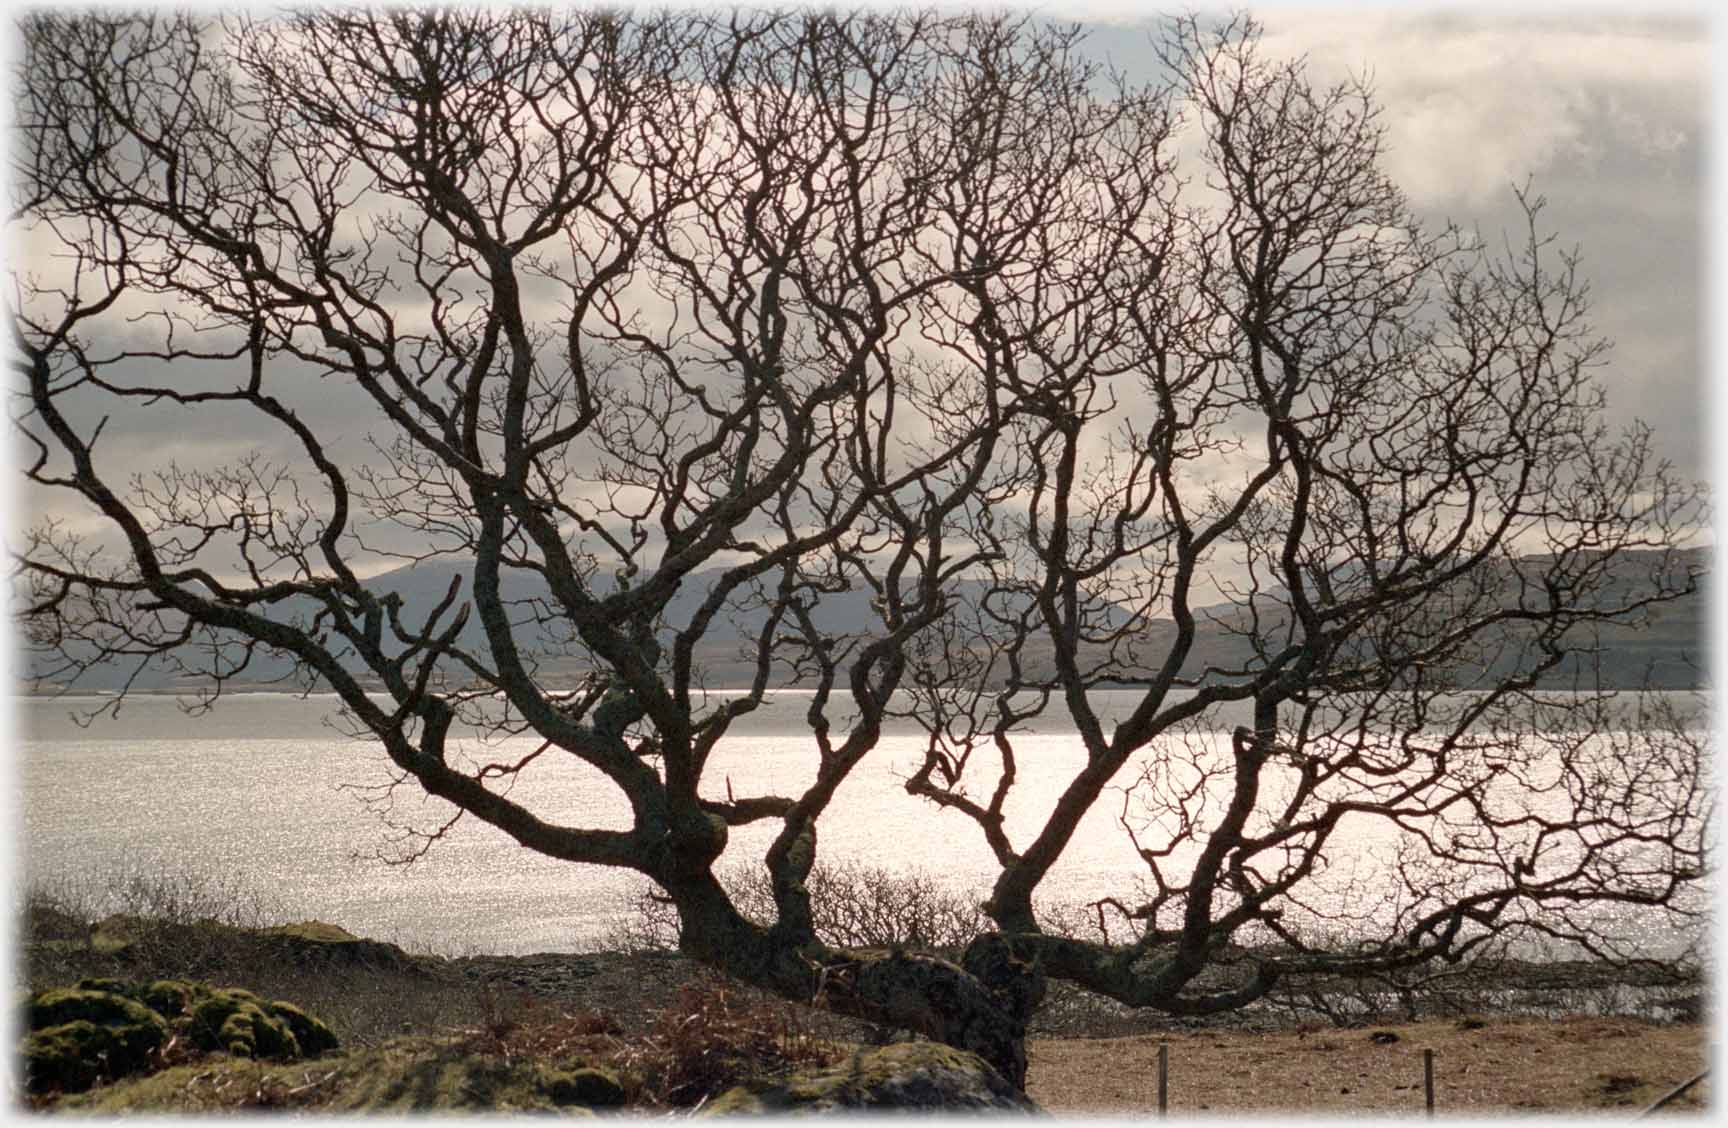 Silhouette of tree with sea and hills beyond.